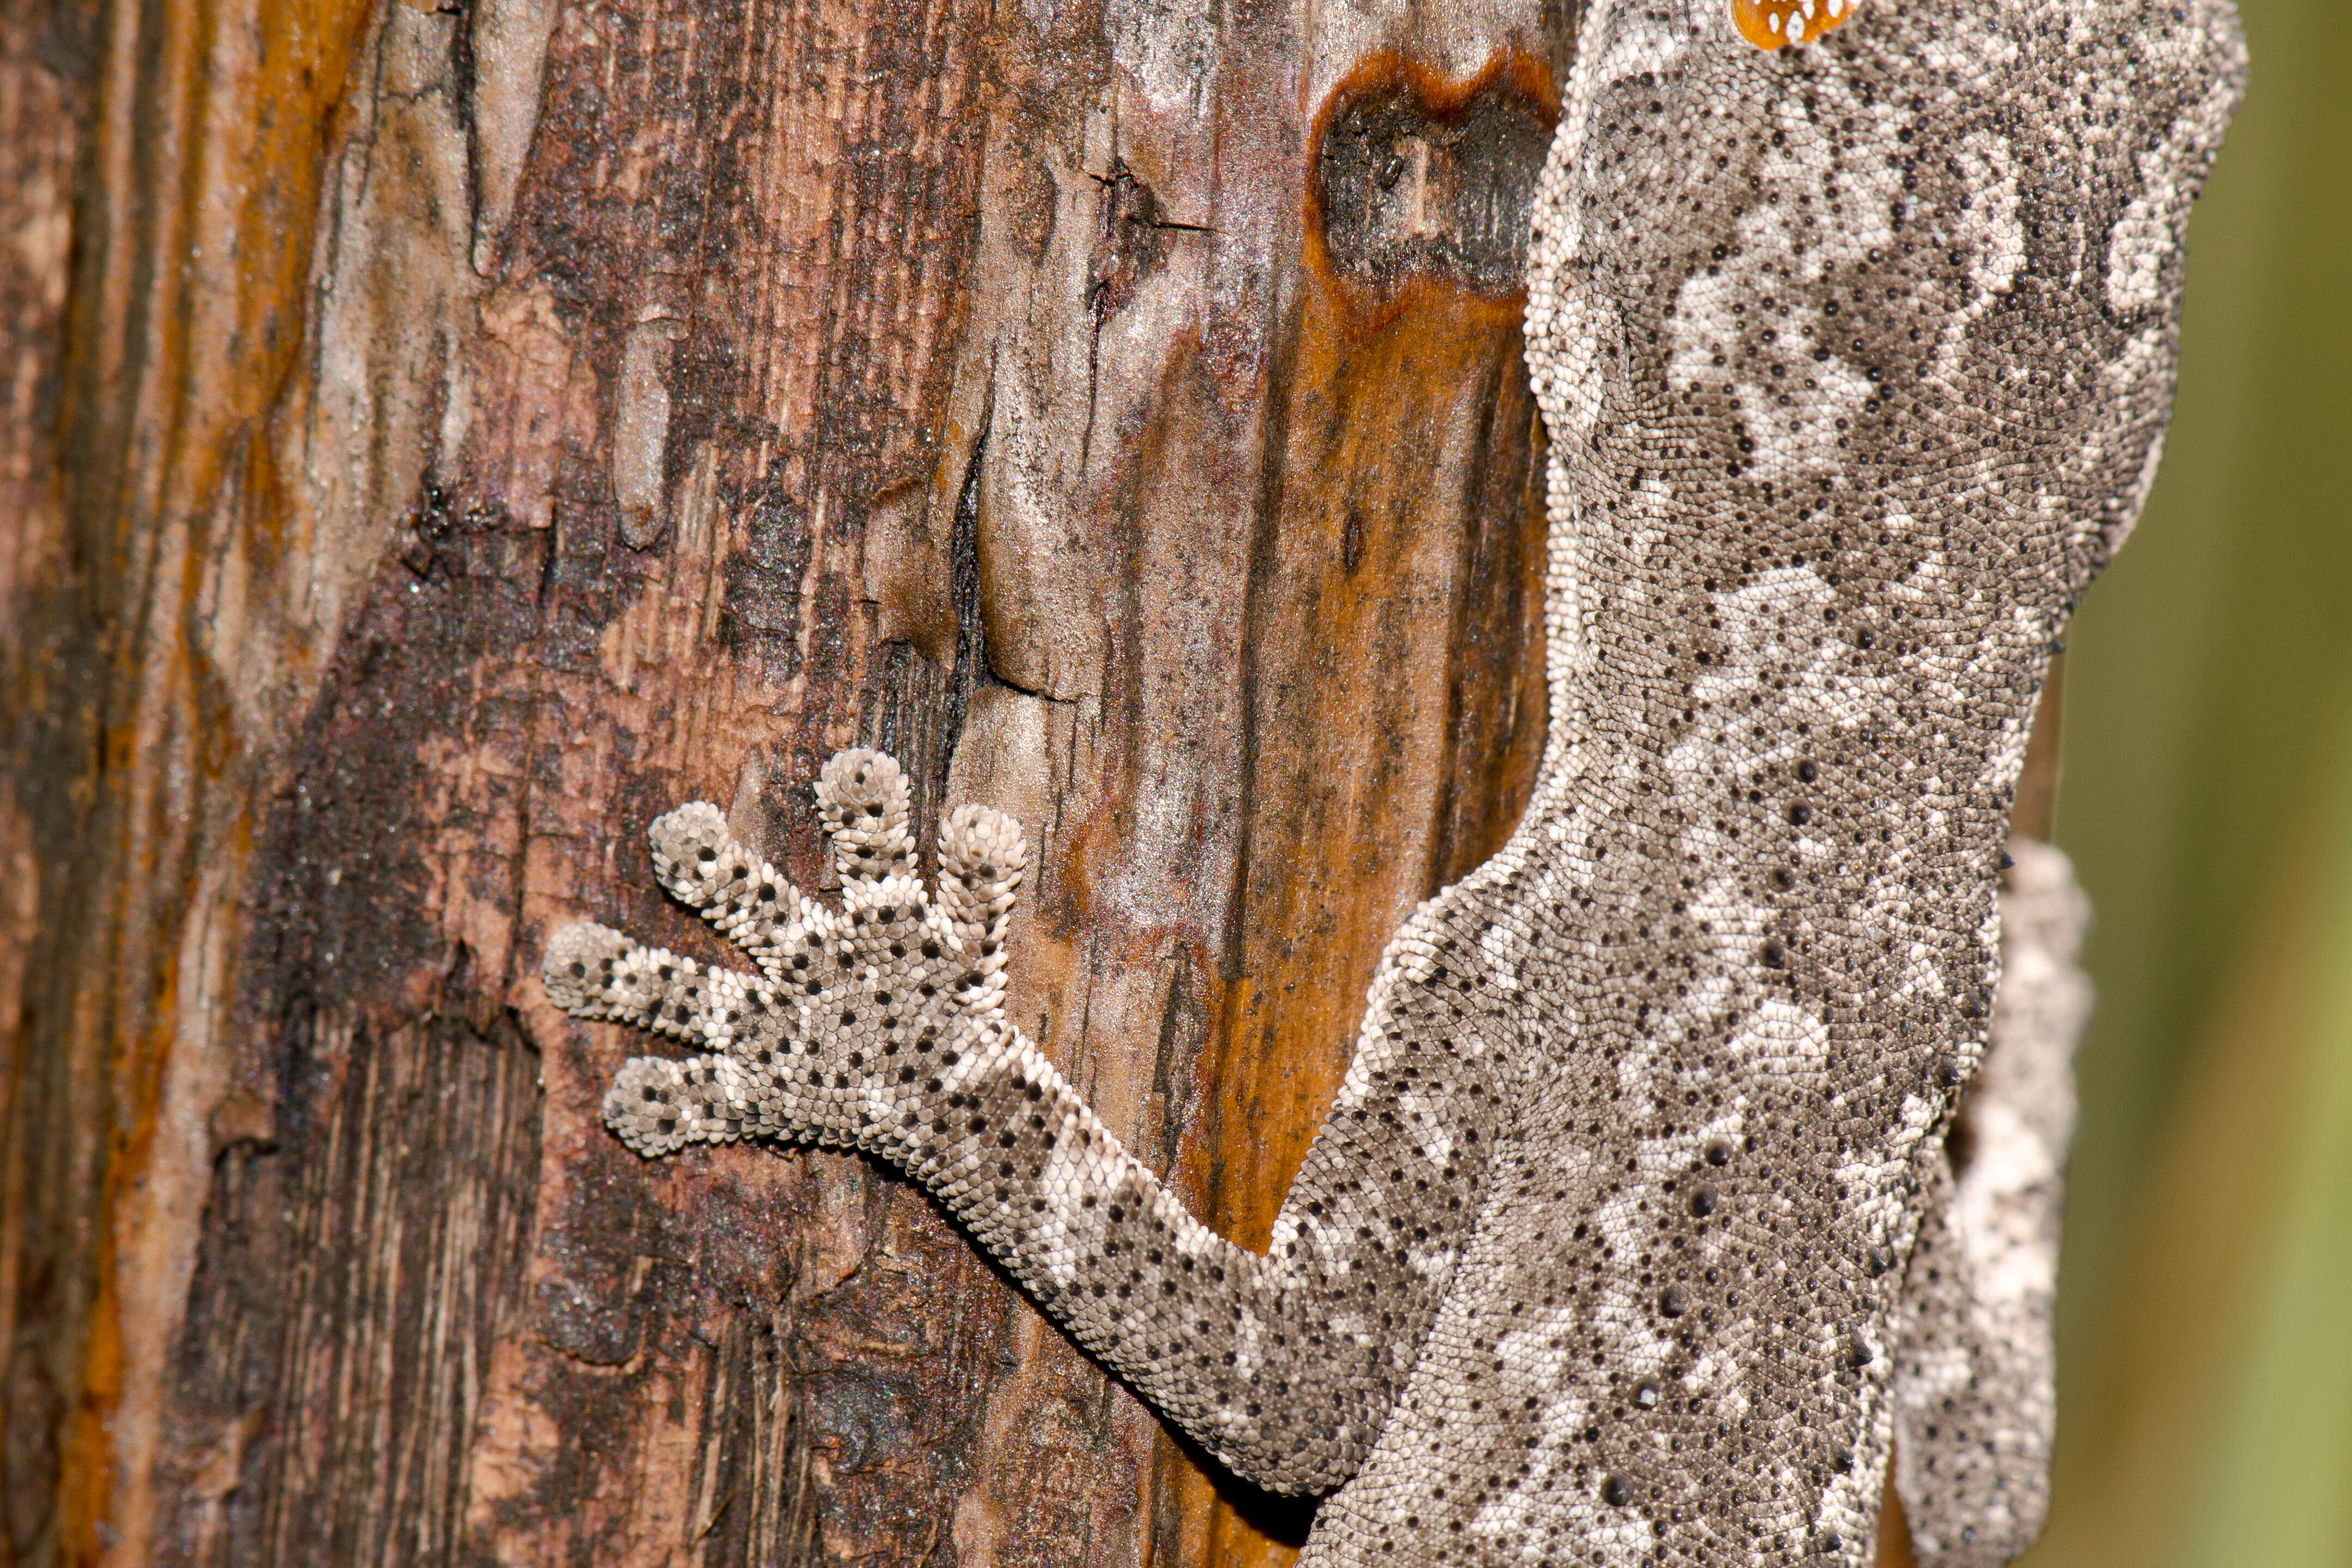 Image of spiny-tailed geckos